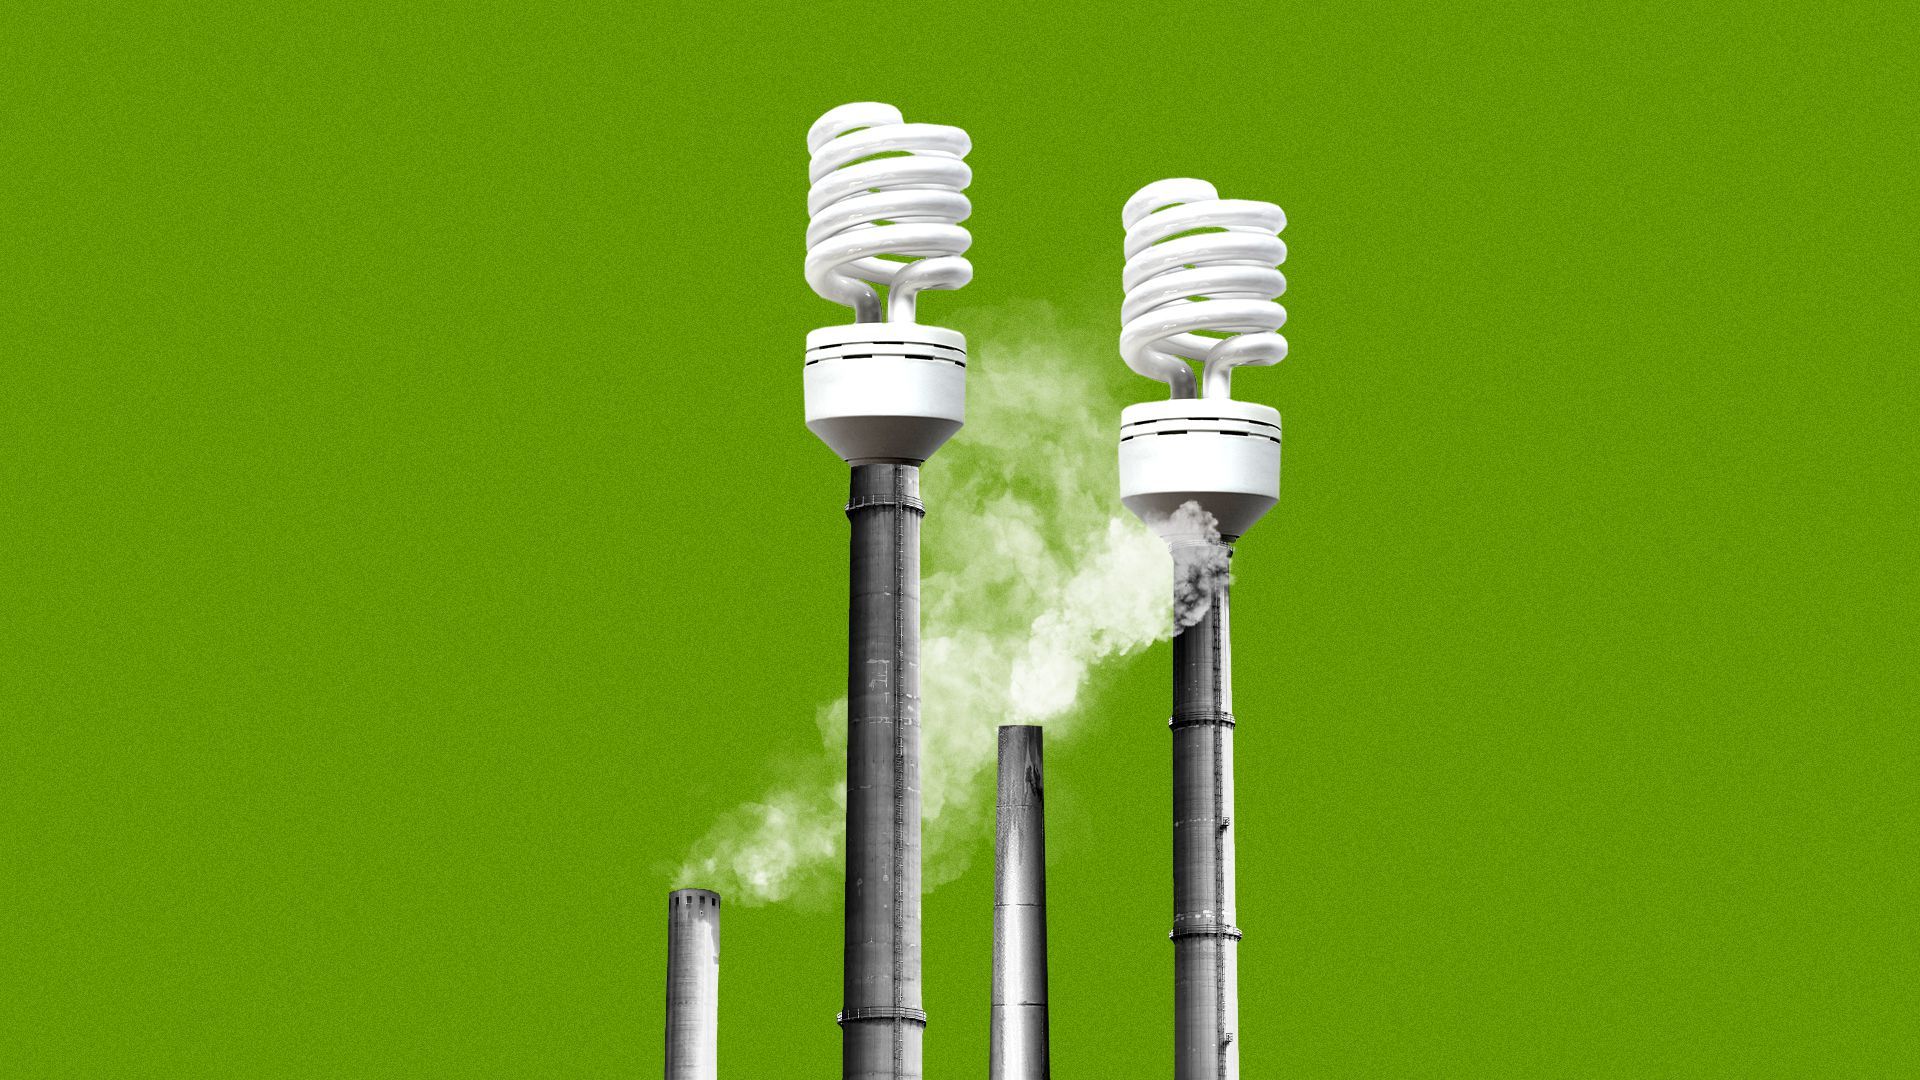 Illustration of a set of smoke stacks with energy efficient bulbs screwed into them.